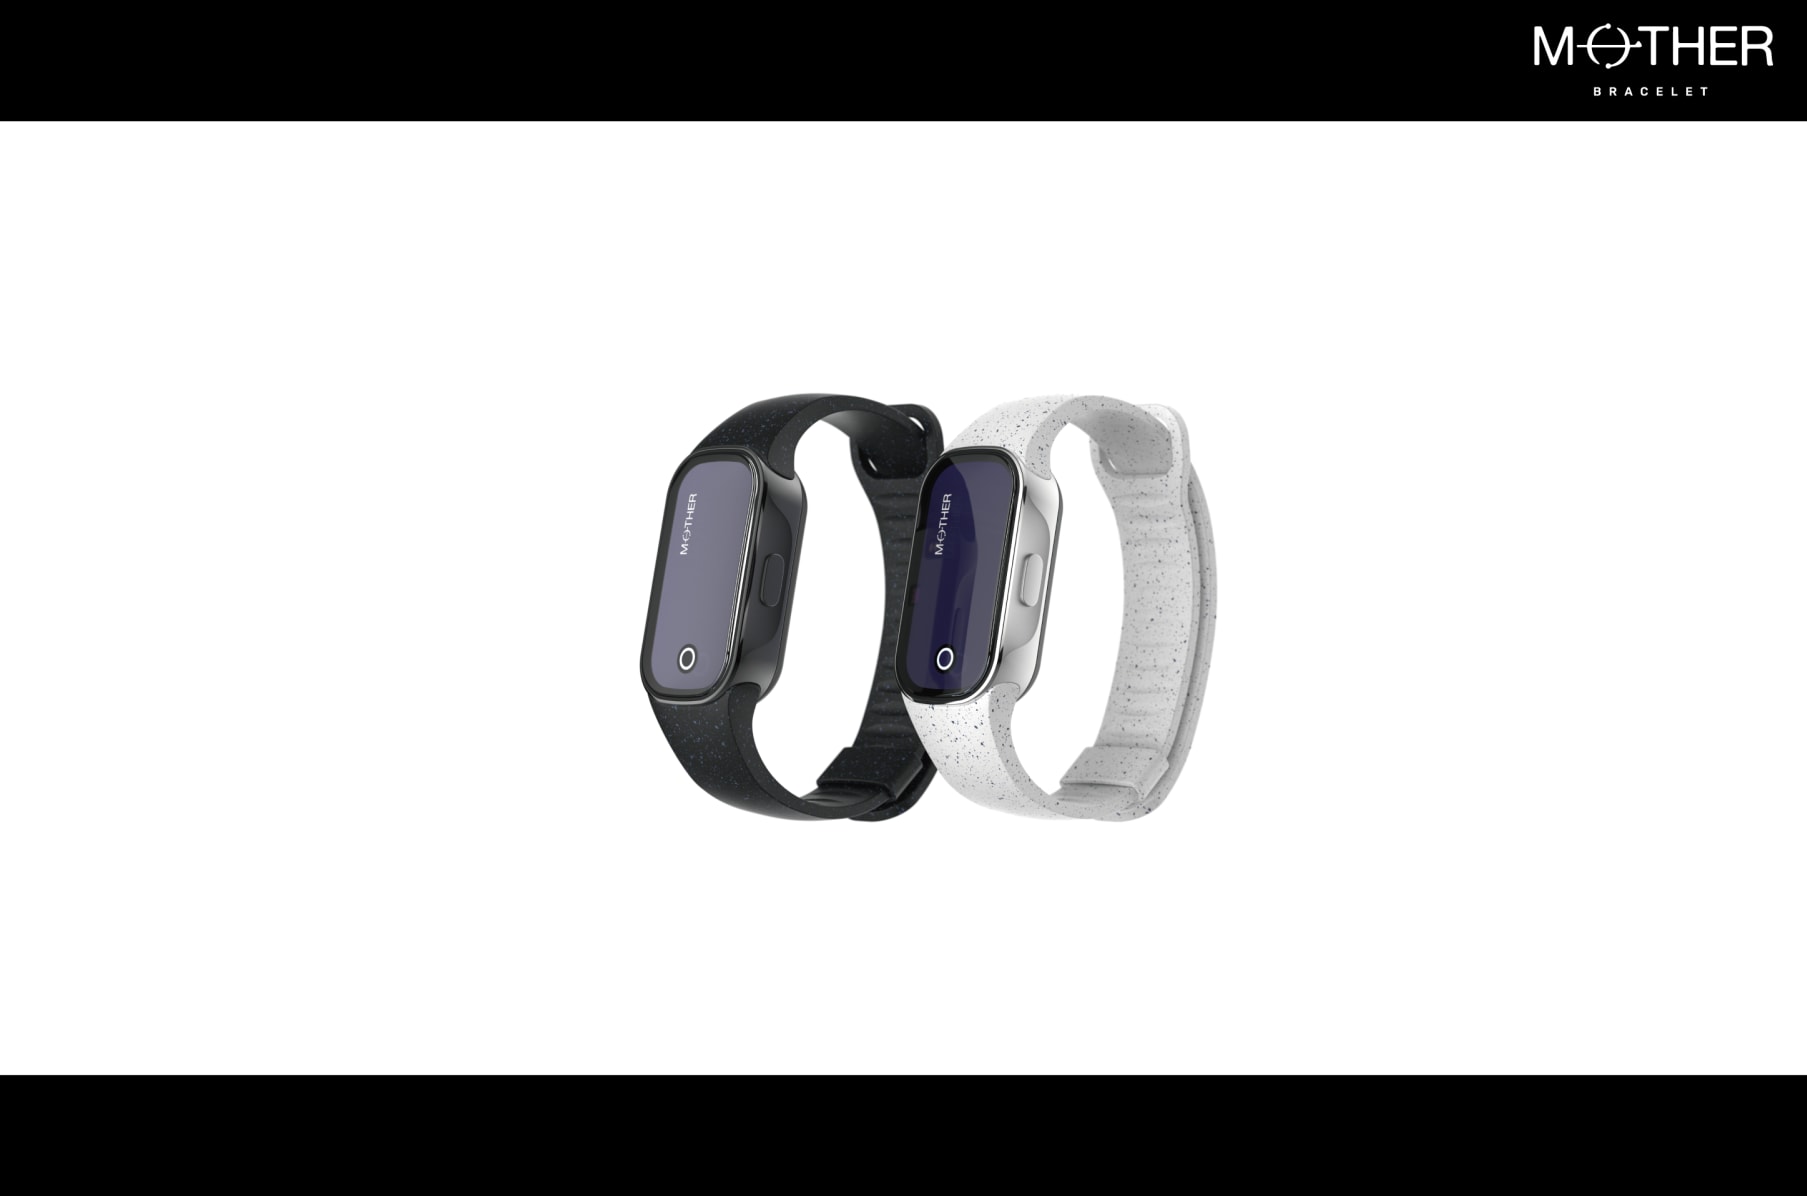 MOTHER Bracelet: First no-charging health tracker | Indiegogo